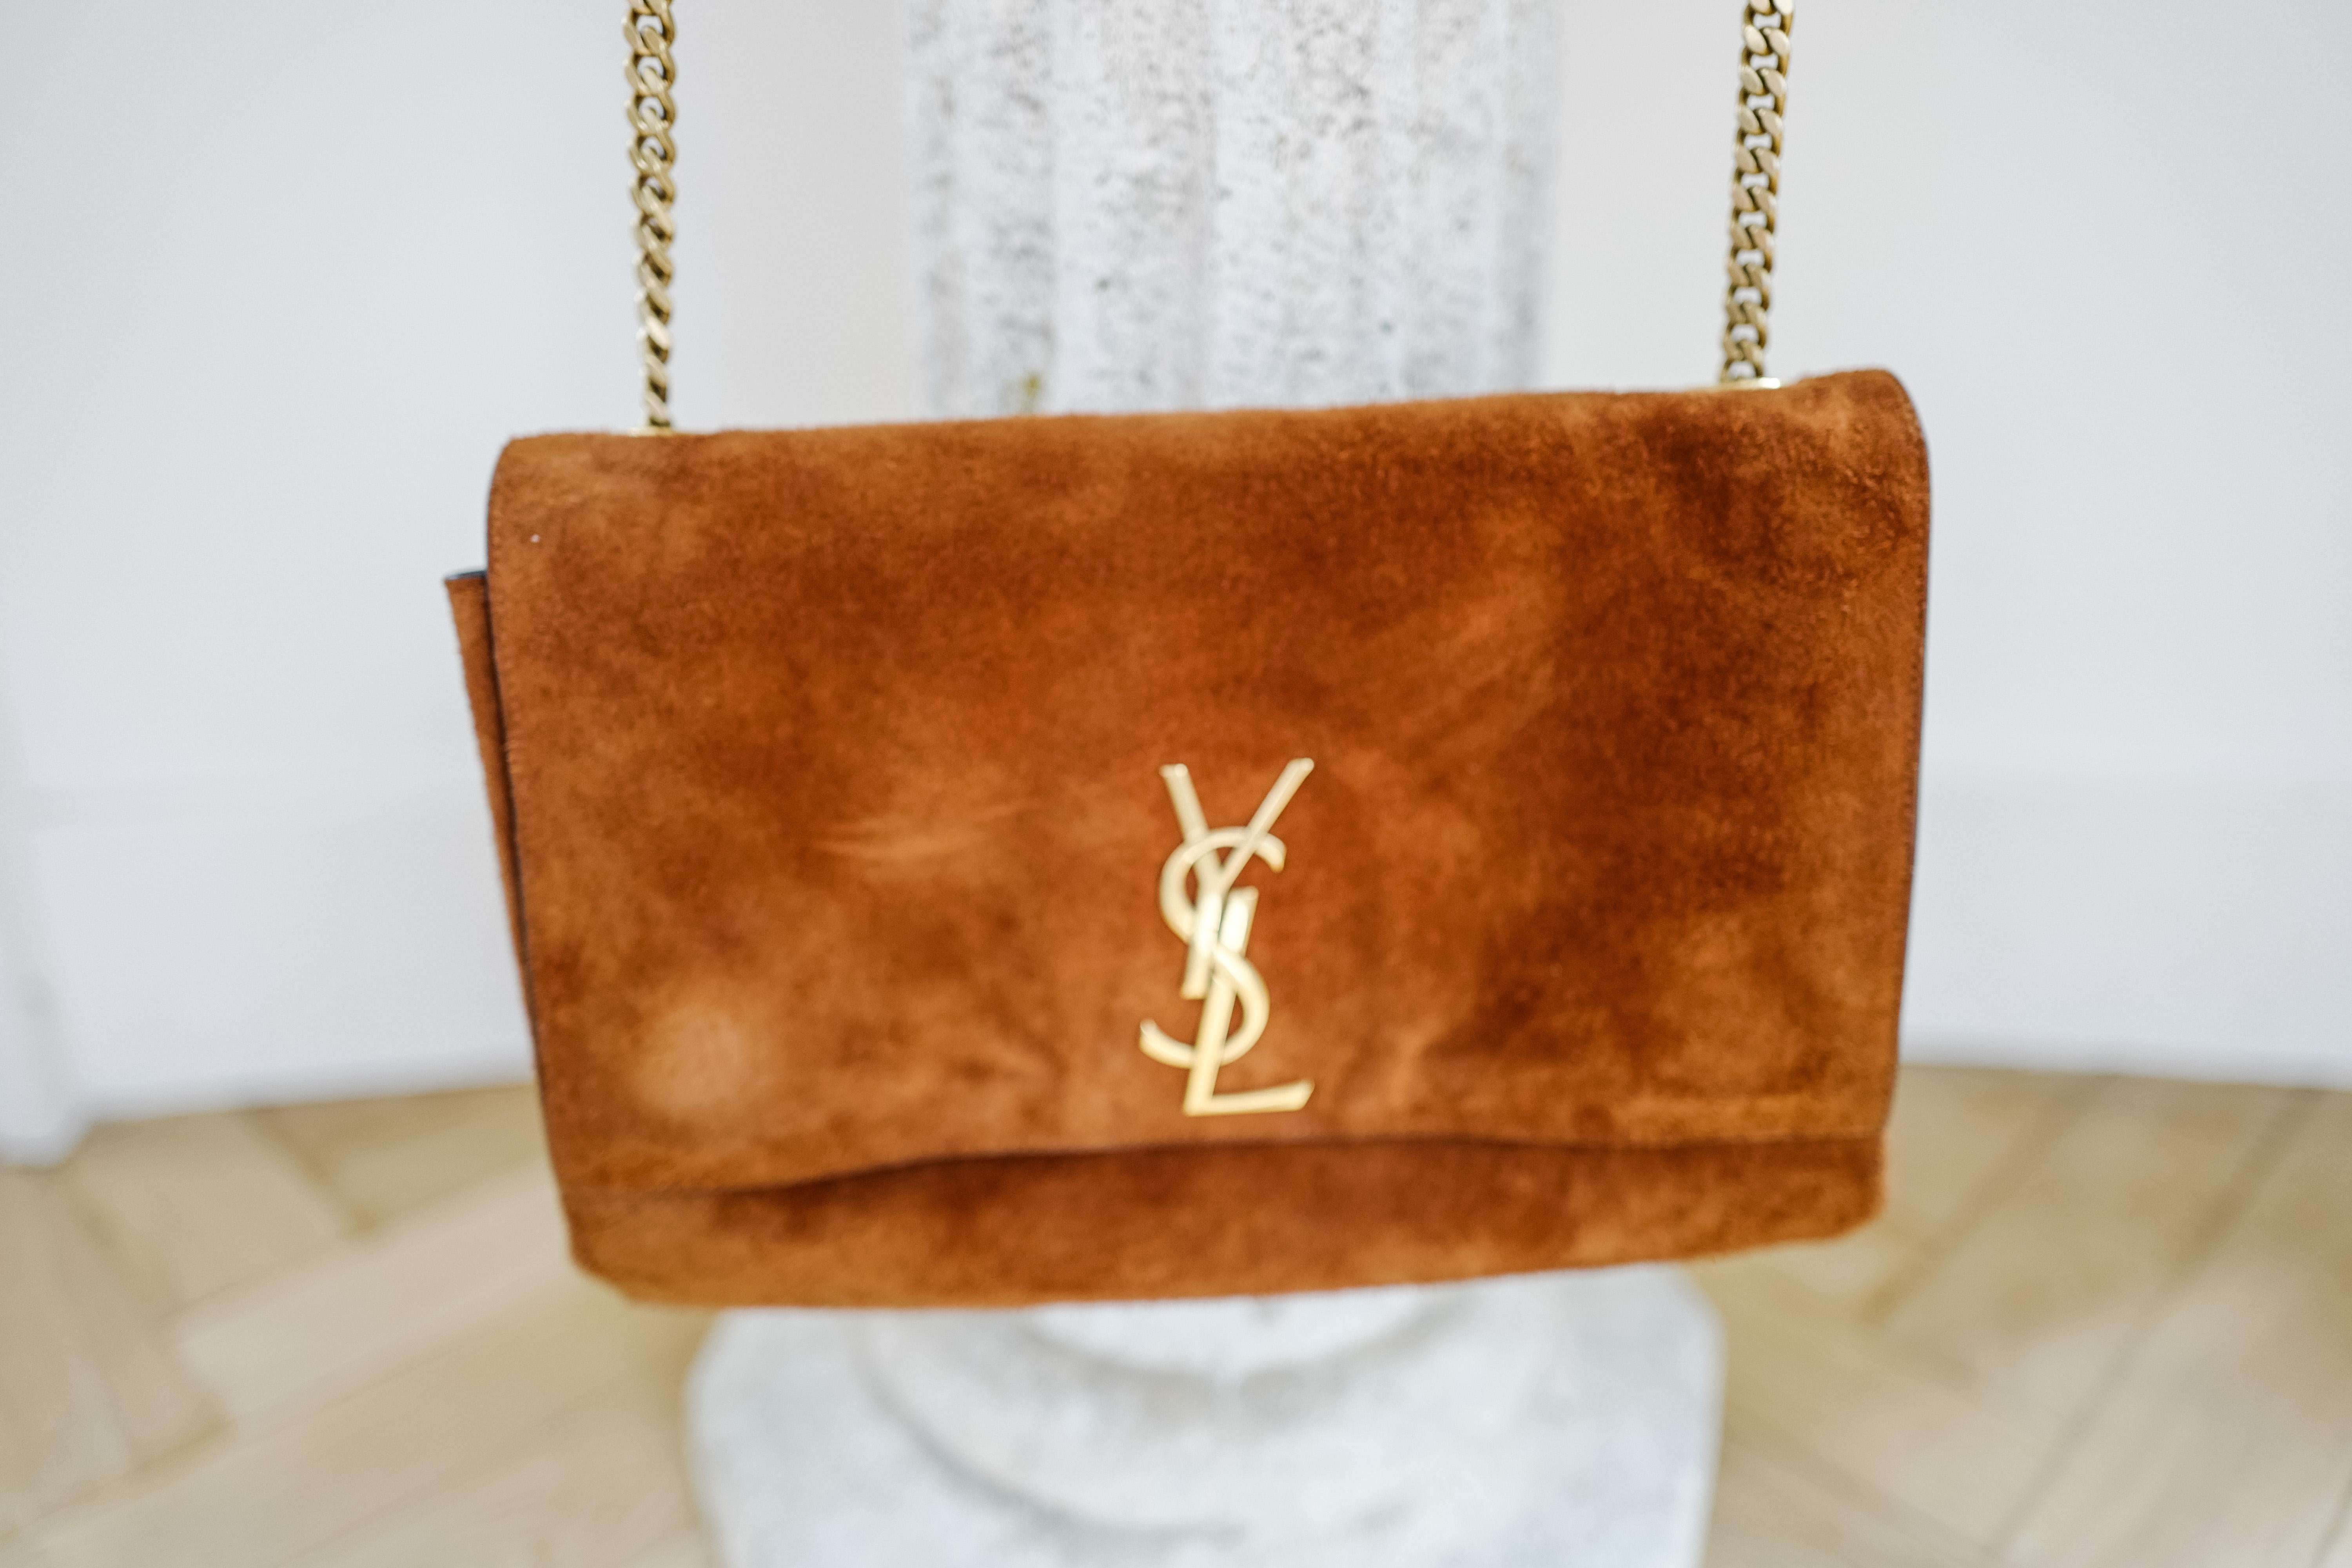 French Saint Laurent Kate Medium Reversible Chain Bag in Suede and Leather